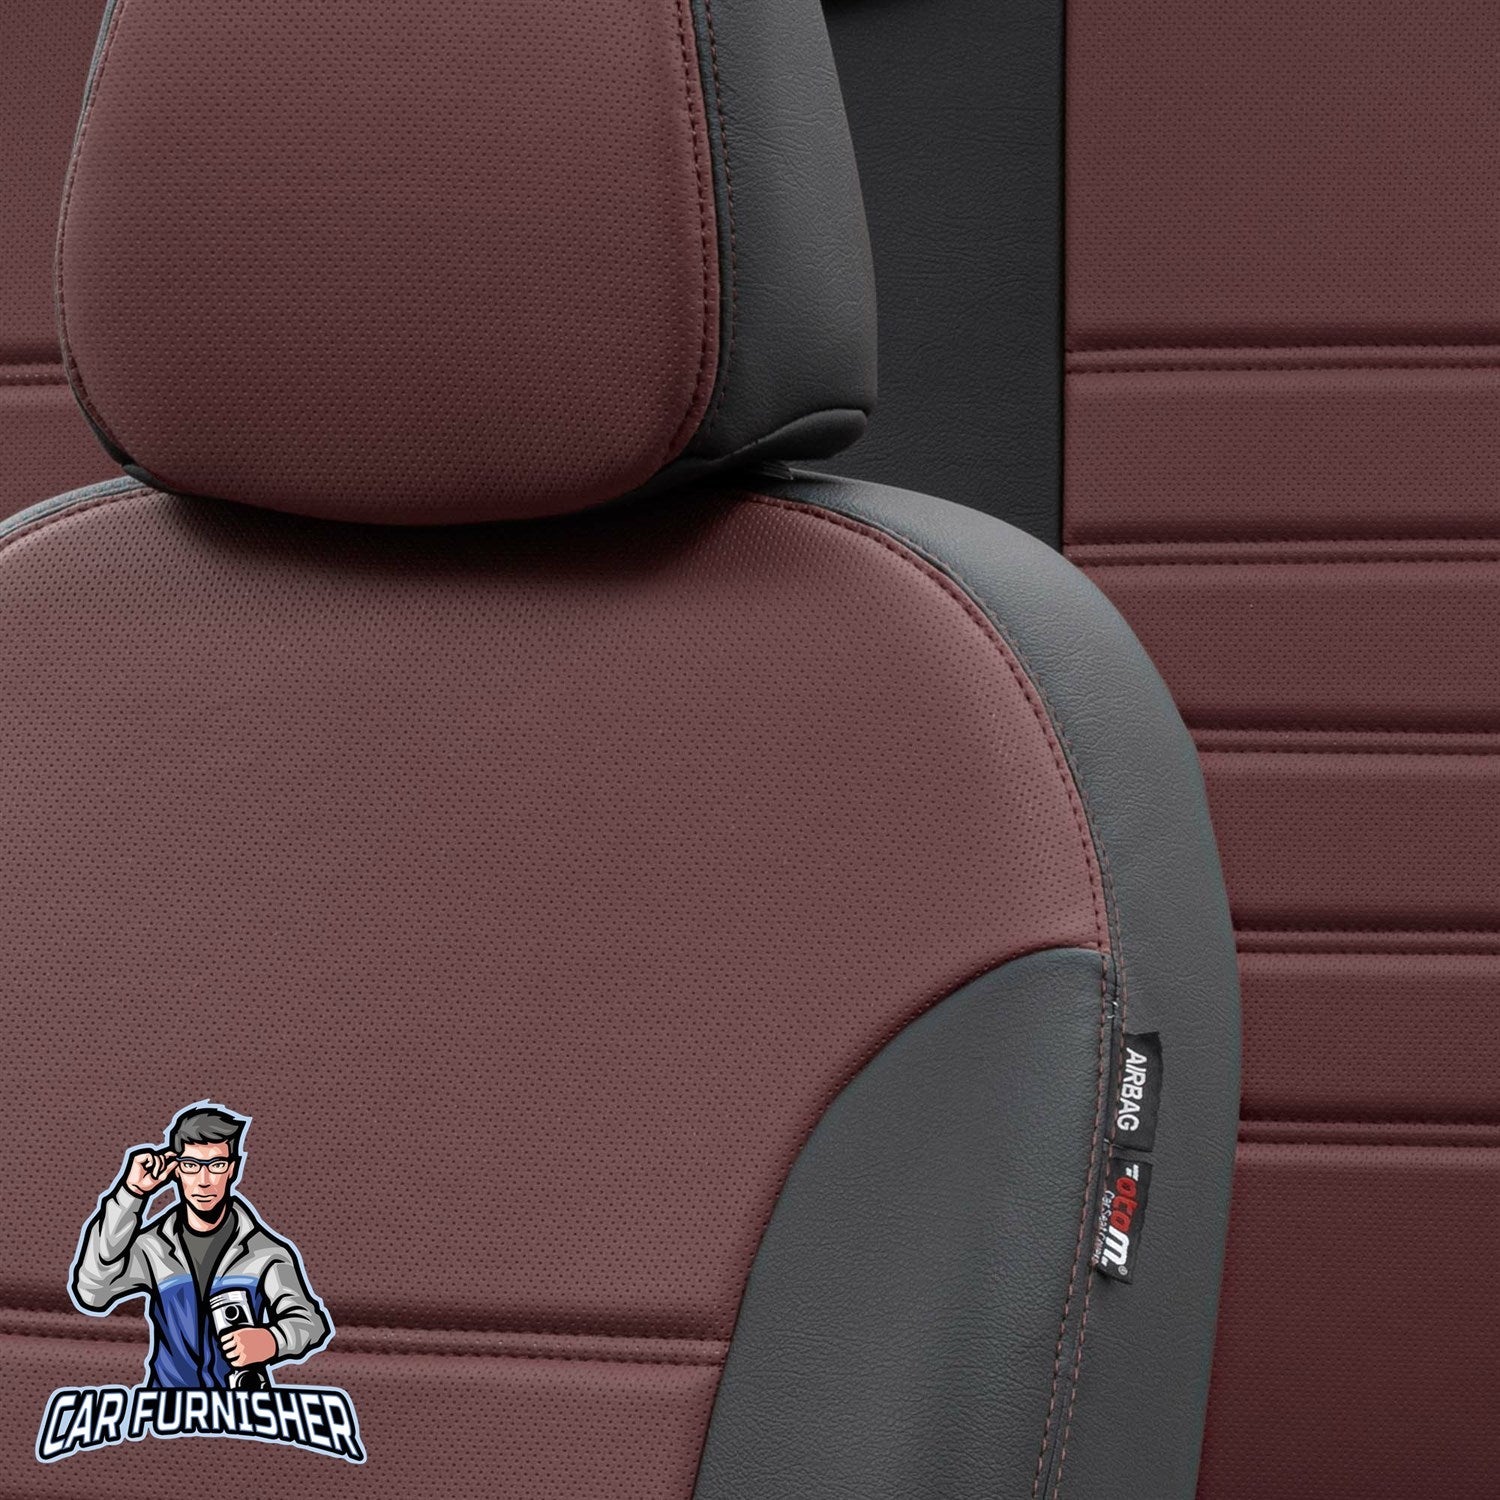 Kia XCeed Seat Covers Istanbul Leather Design Burgundy Leather